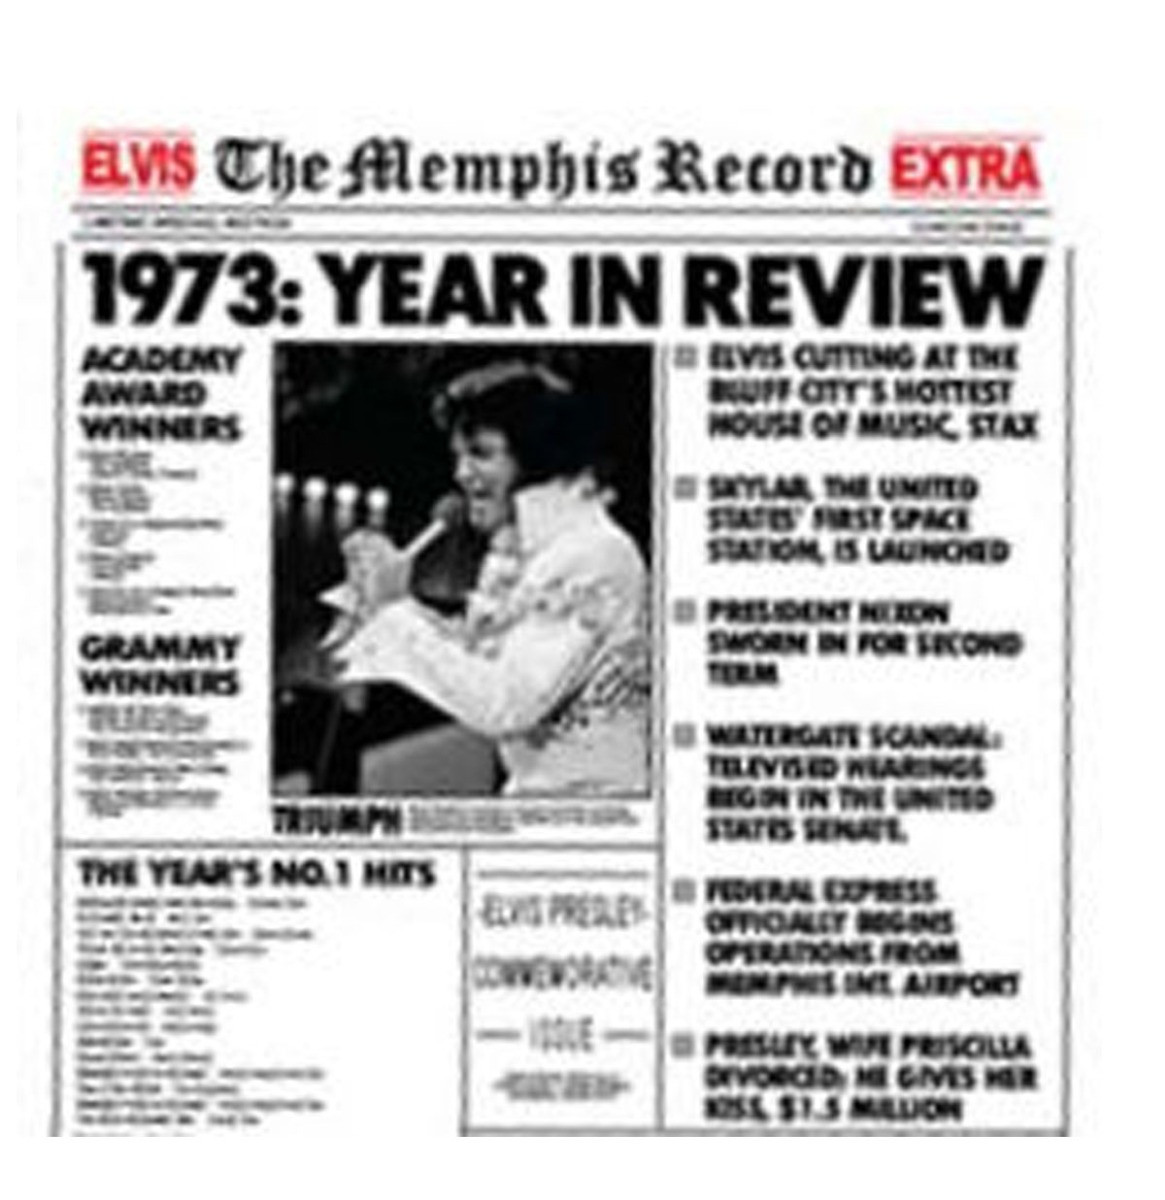 Elvis Presley - The Memphis Record 1973: Year in Review 2CD